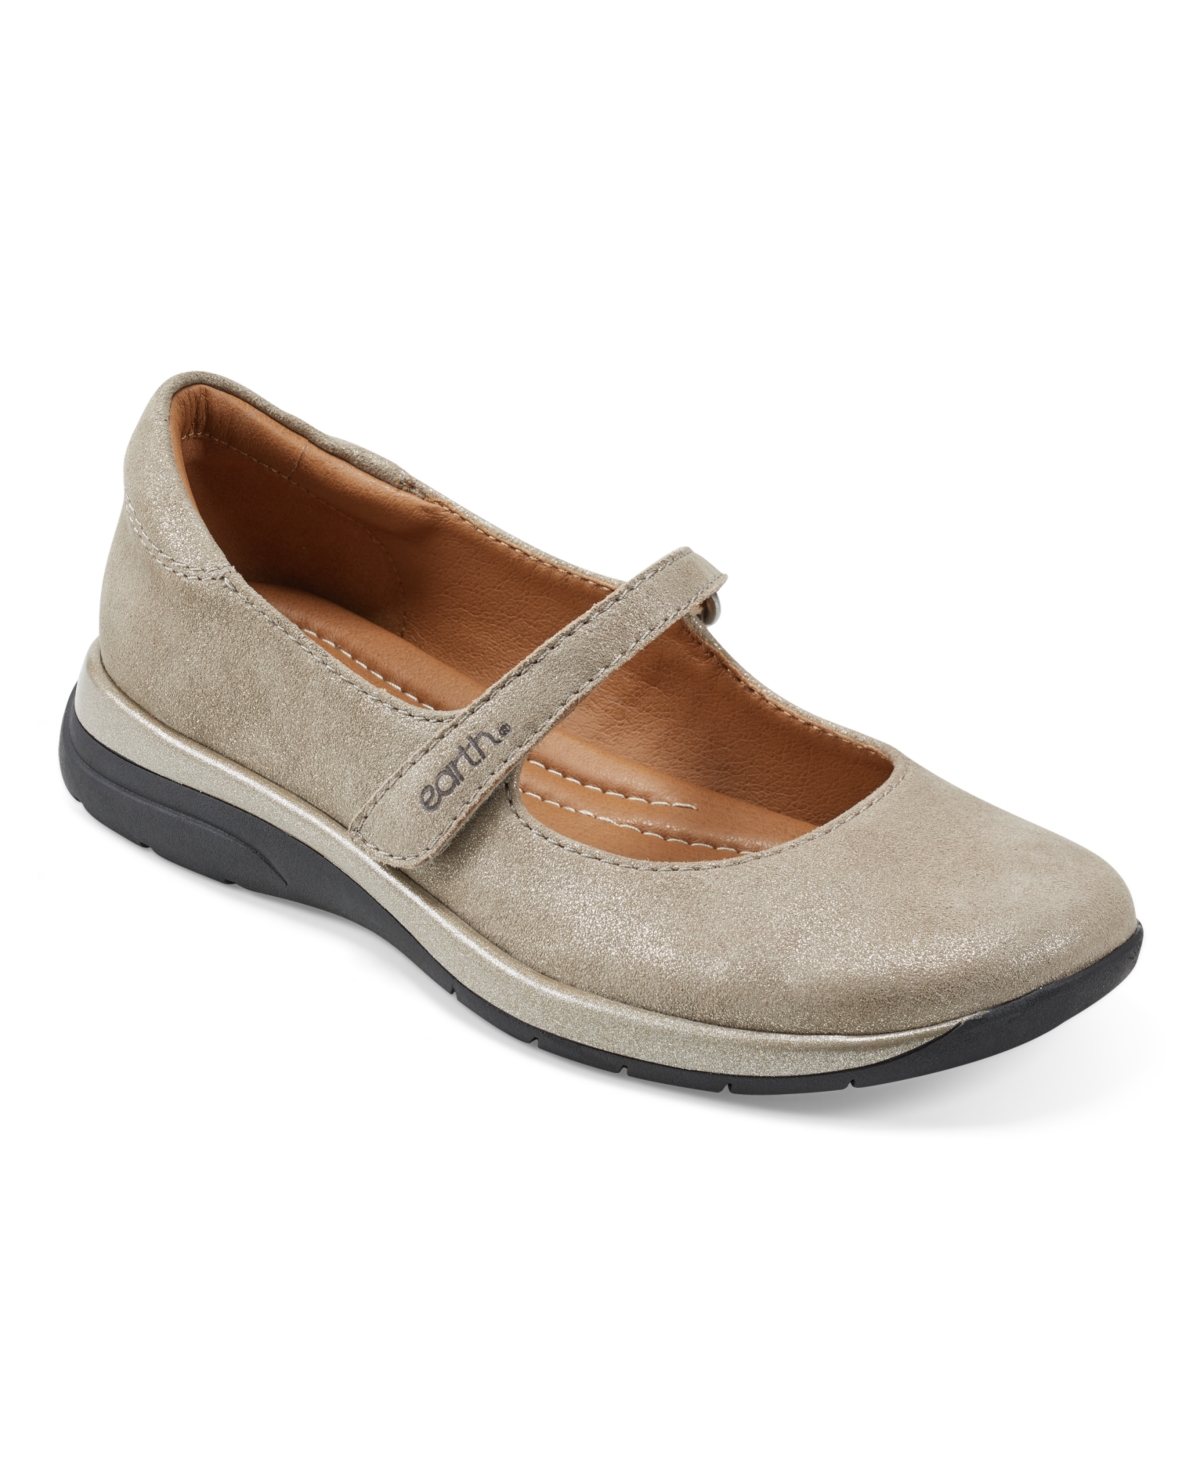 Earth Women's Tose Round Toe Mary Jane Casual Ballet Flats In Gold Suede